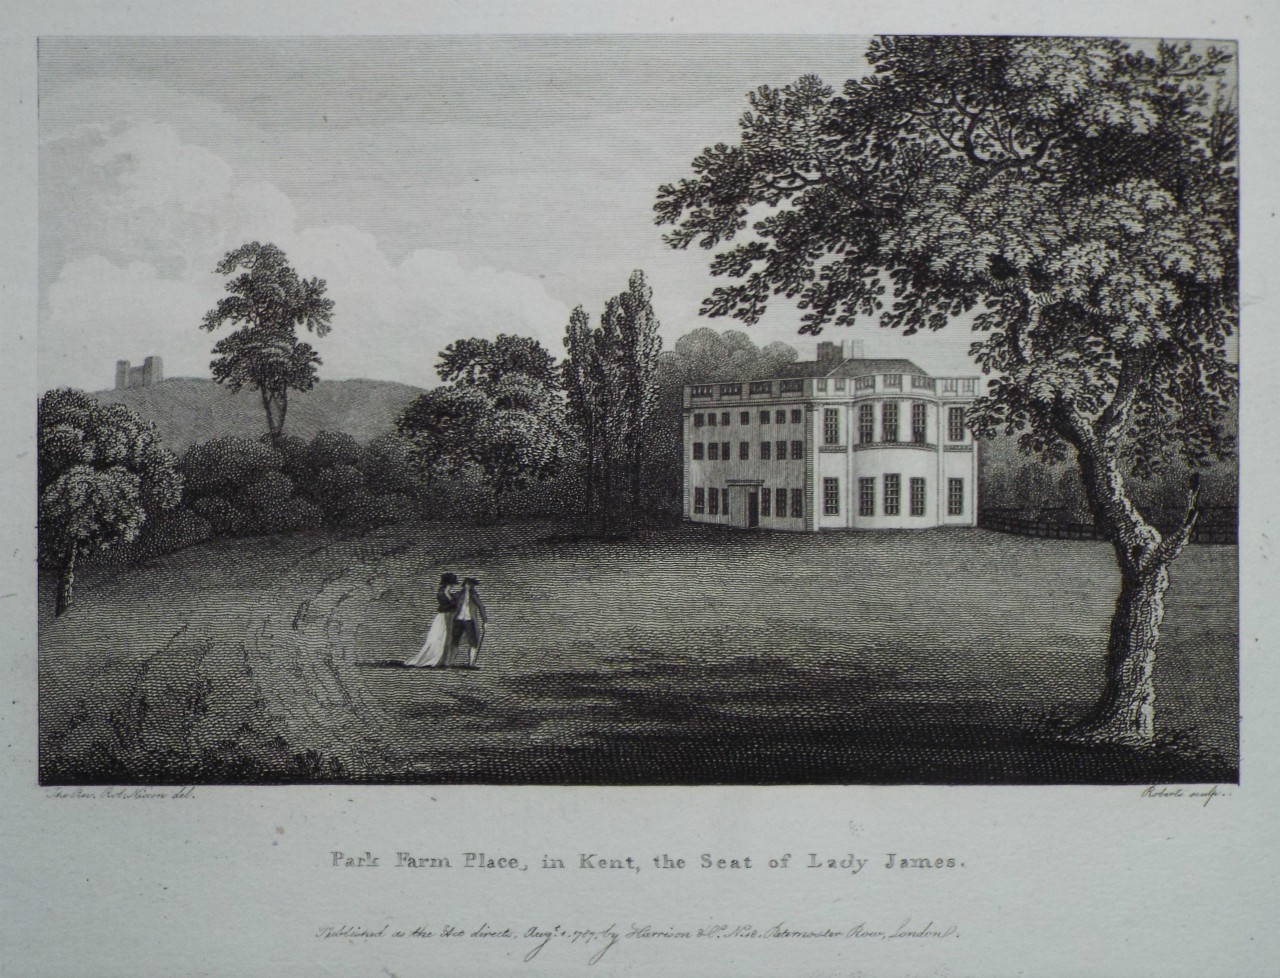 Print - Park Farm Place, in Kent, the Seat of Lady James. - 